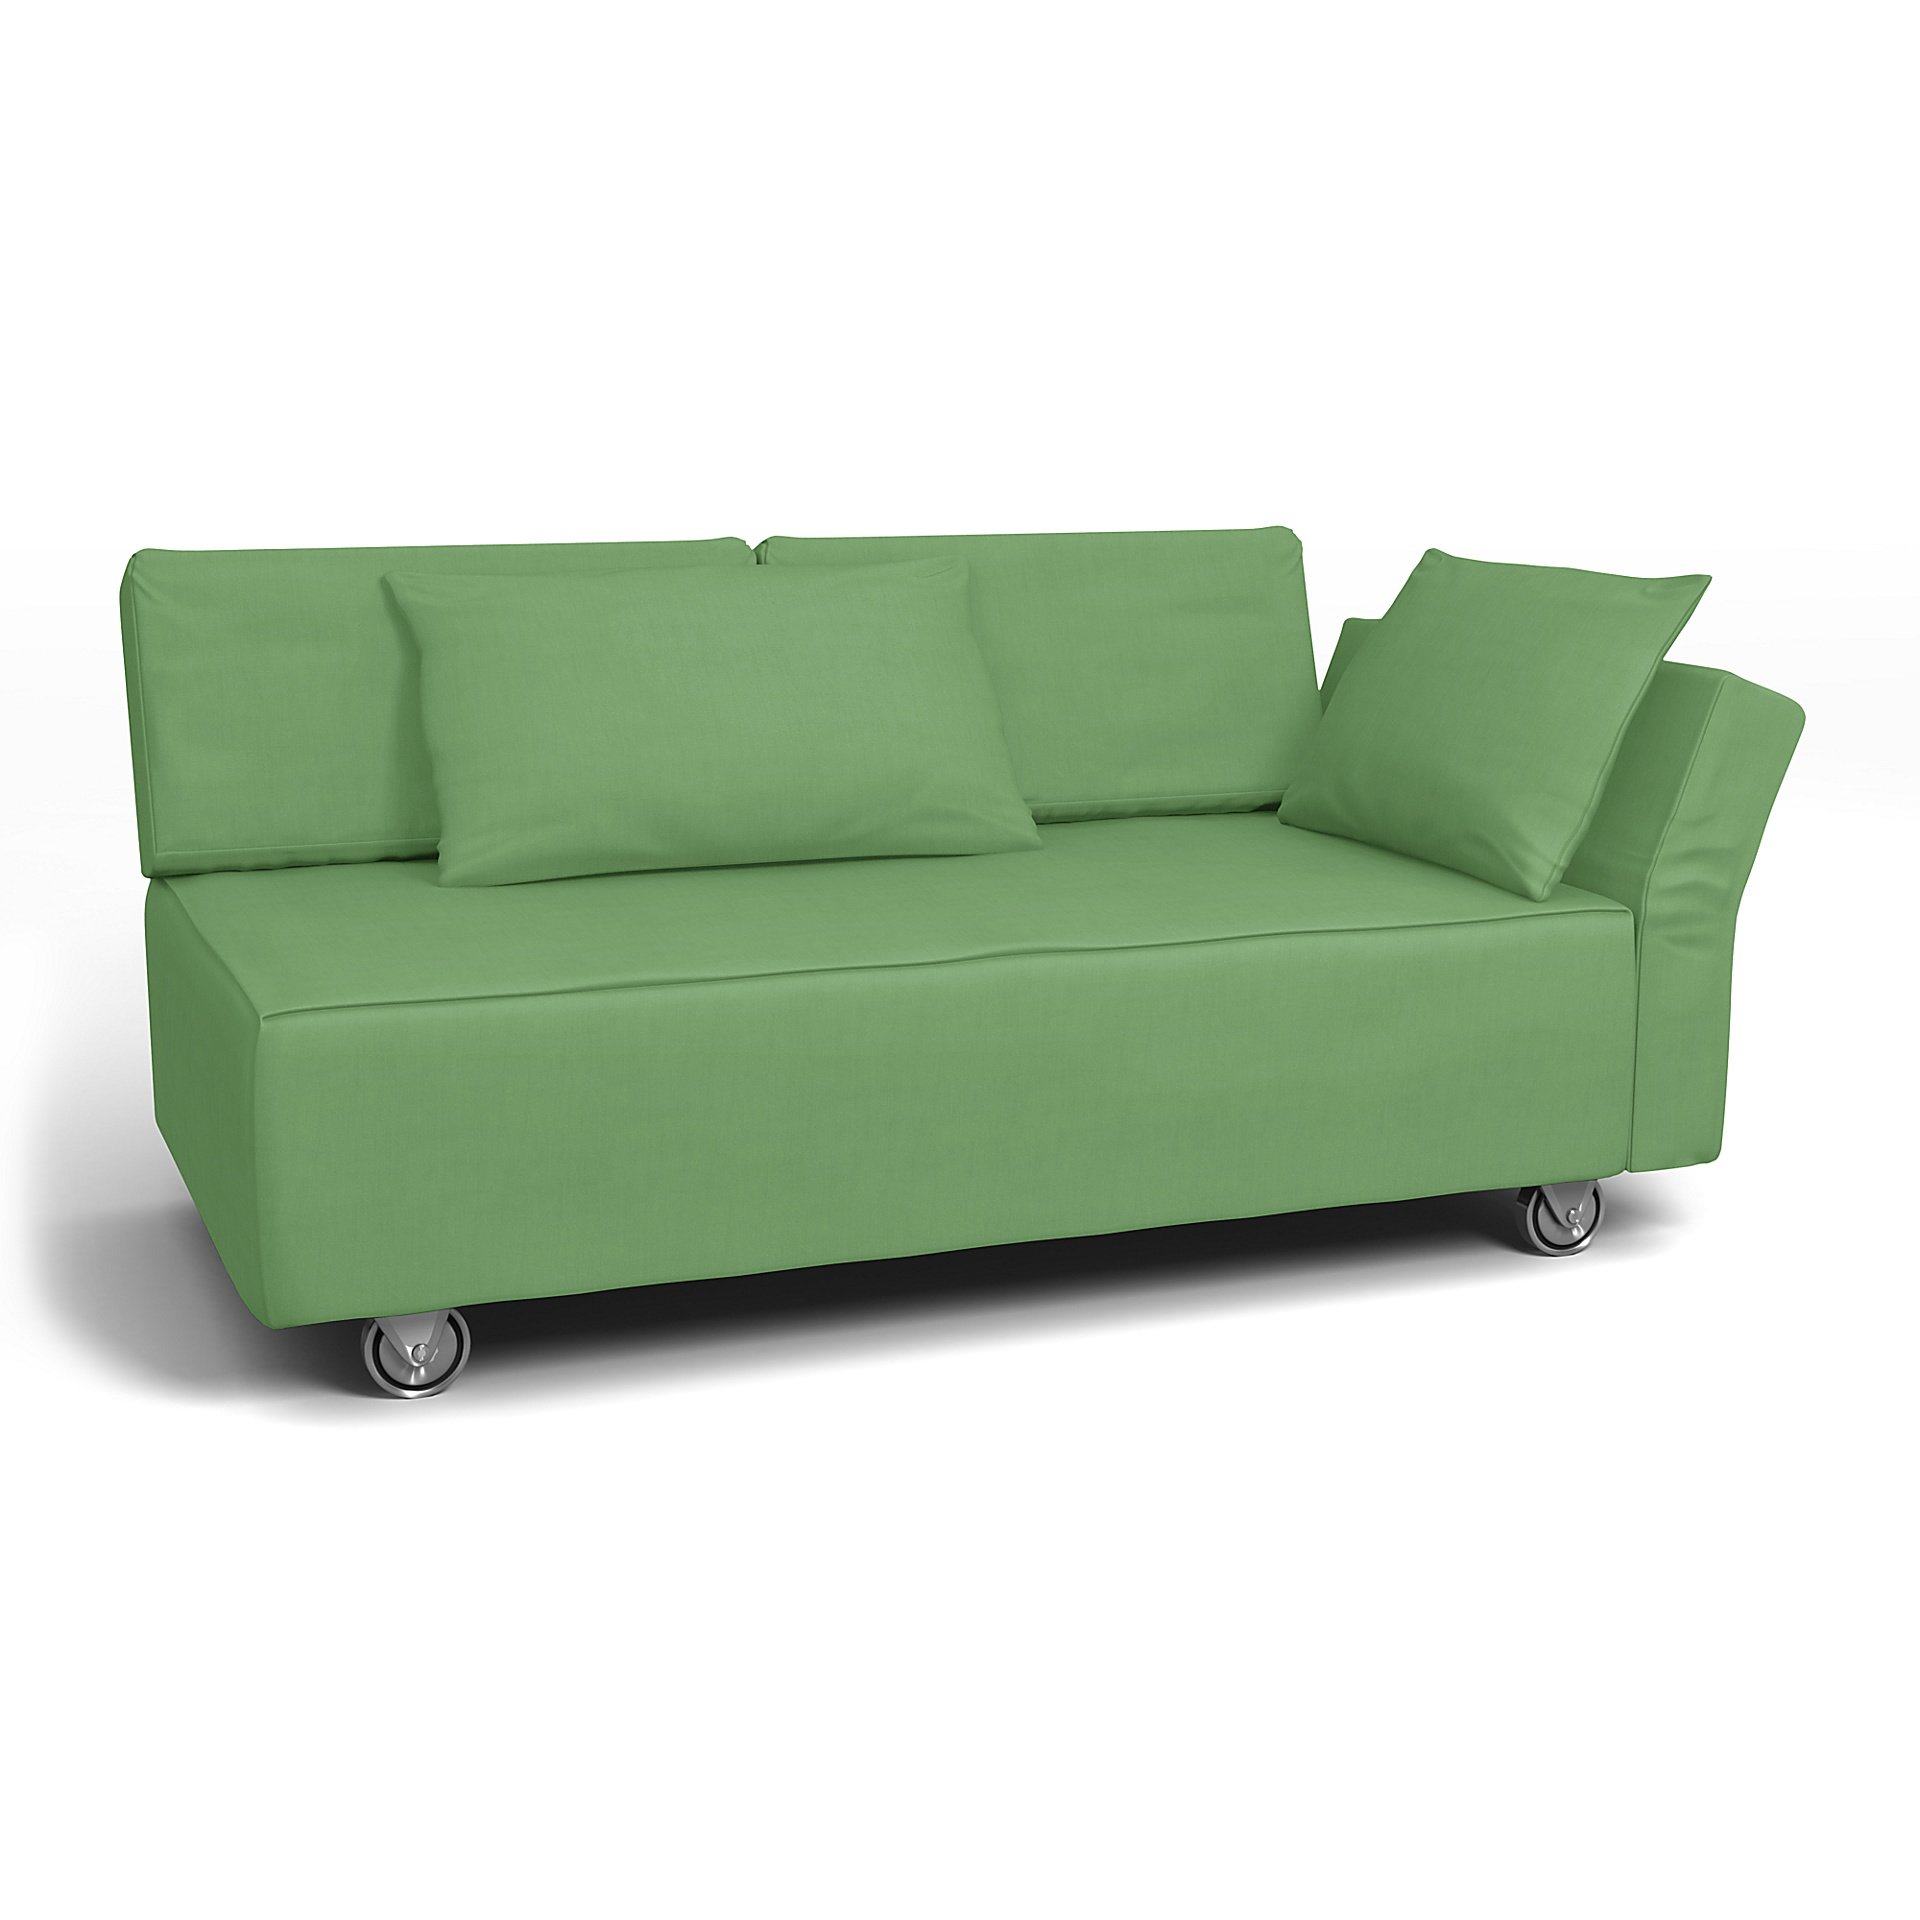 IKEA - Falsterbo 2 Seat Sofa with Right Arm Cover, Apple Green, Linen - Bemz